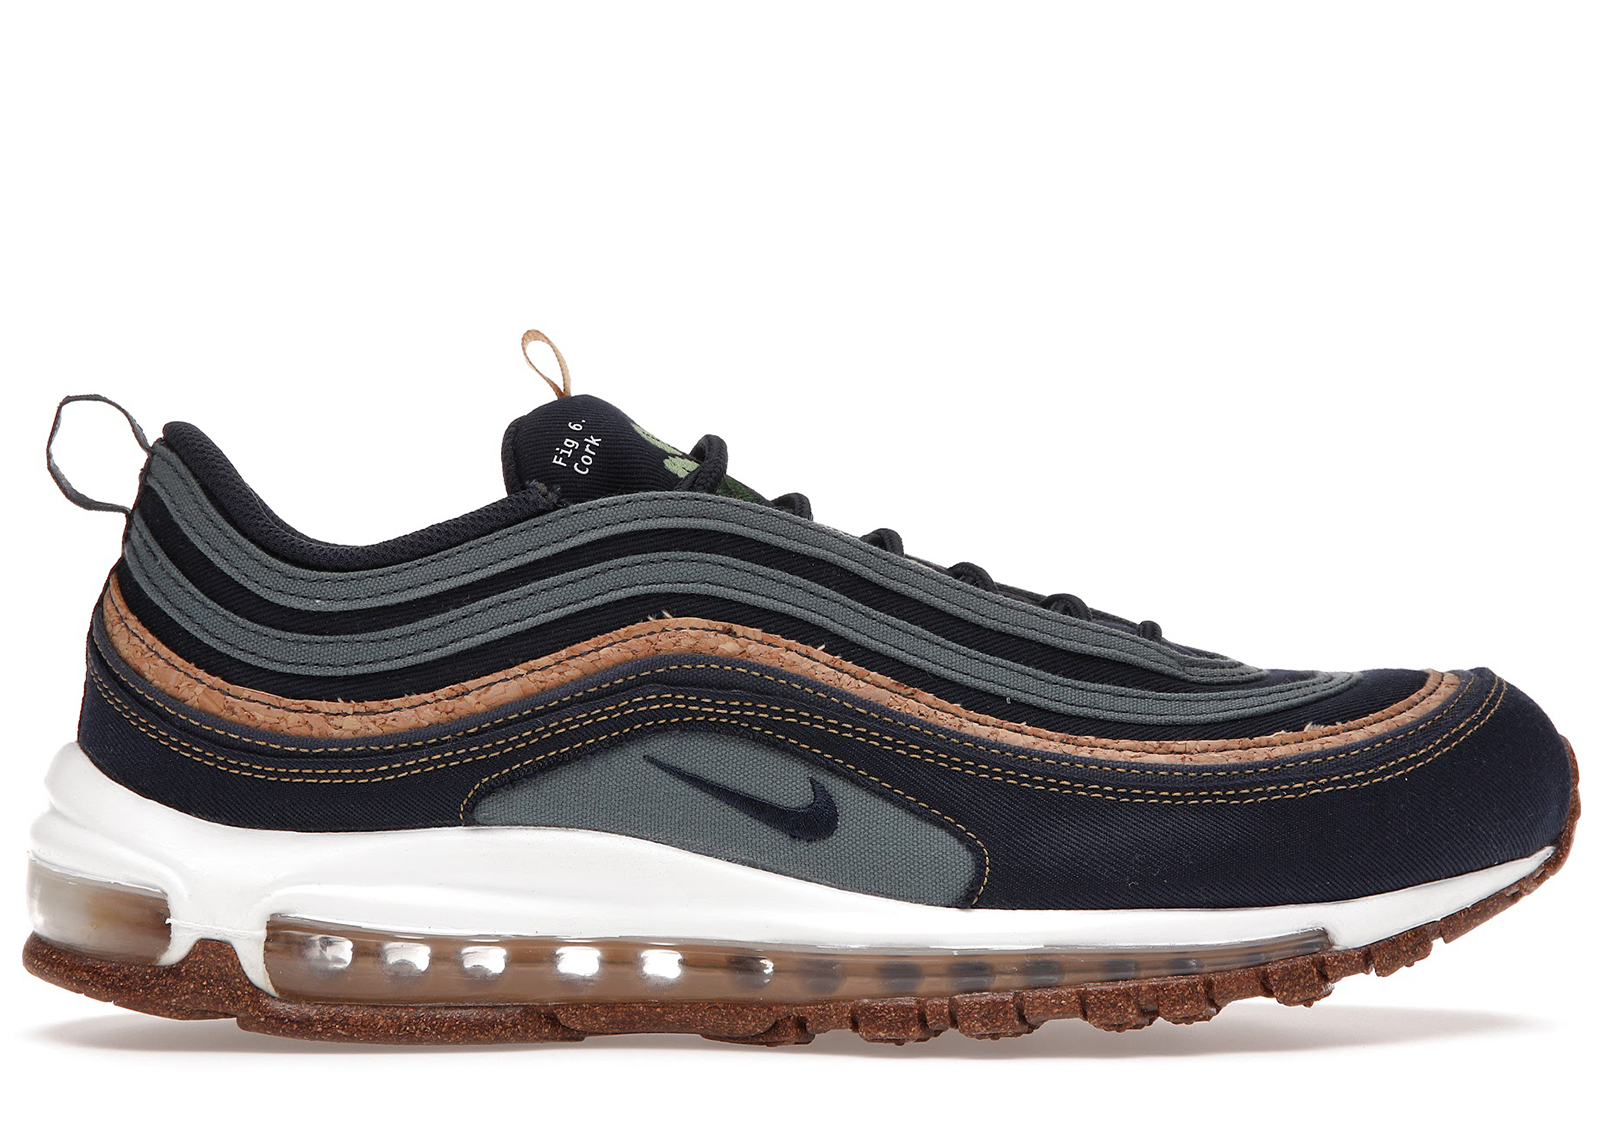 Nike Air Max 97 Sneakers - StockX فستان السا وانا